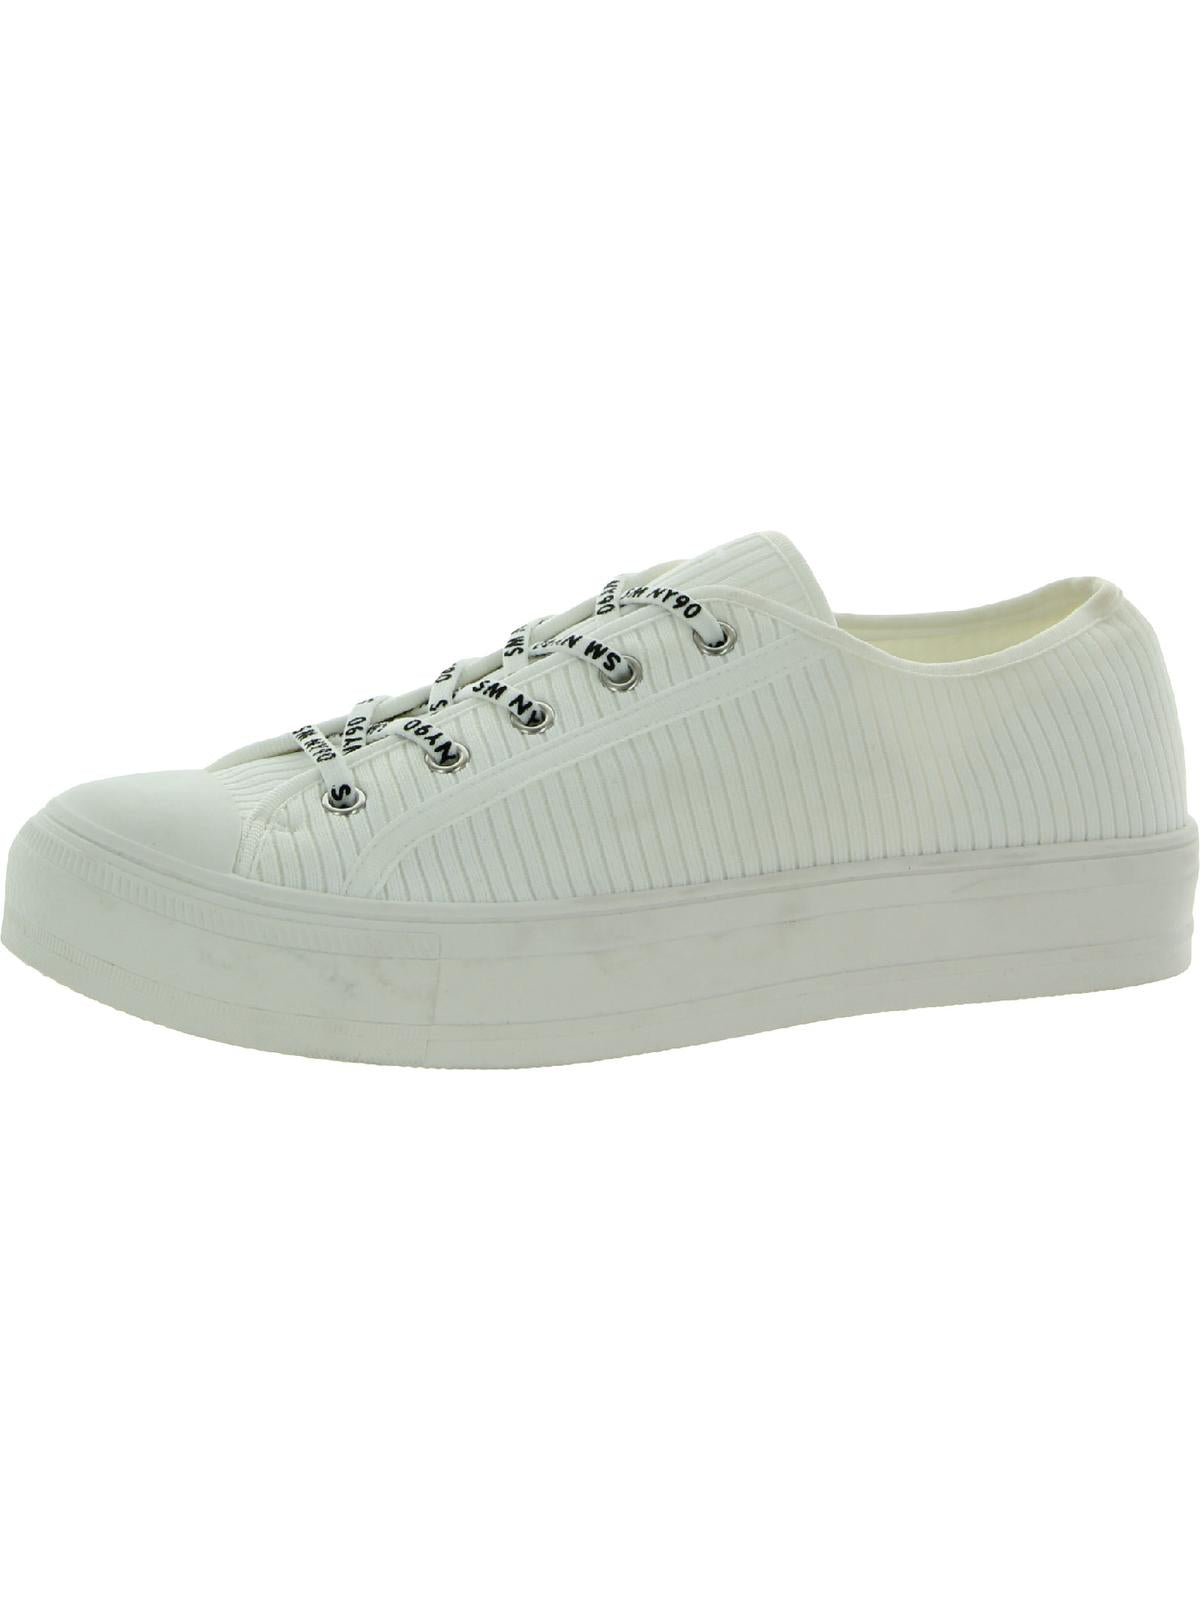 Shop Steve Madden Vex Womens Fitness Lifestyle Athletic And Training Shoes In White